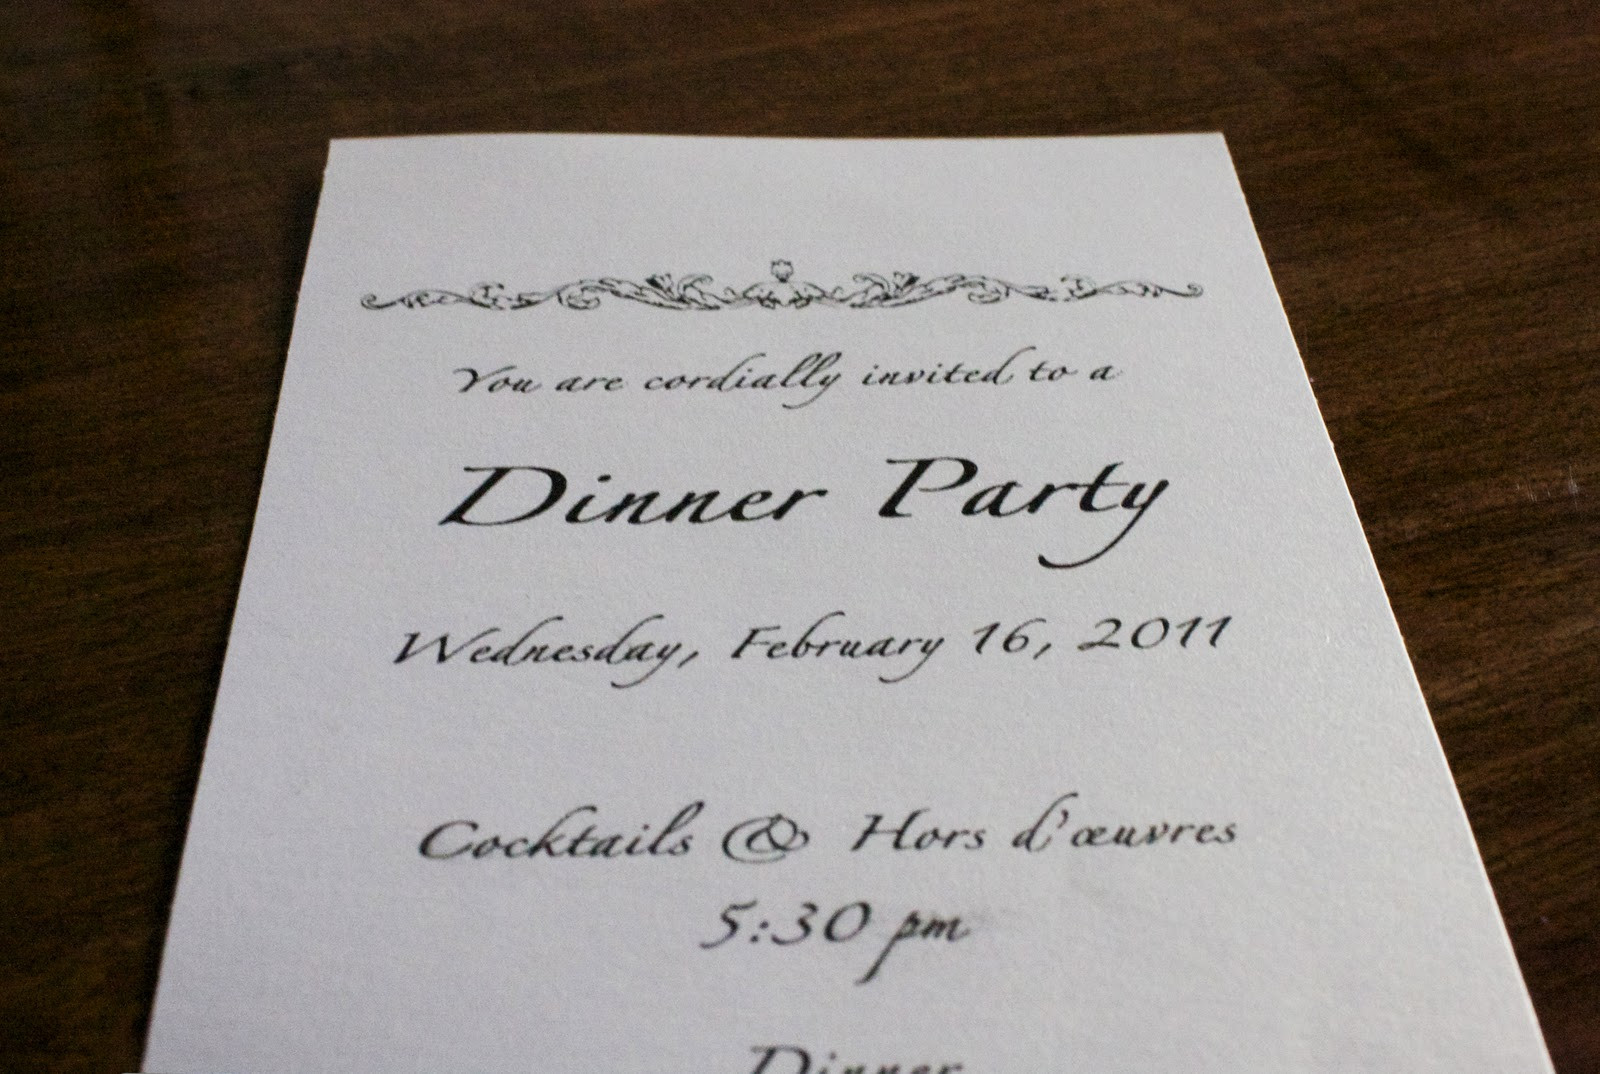 Dinner Party Invitation Ideas
 DINNER PARTY INVITATION QUOTES image quotes at hippoquotes